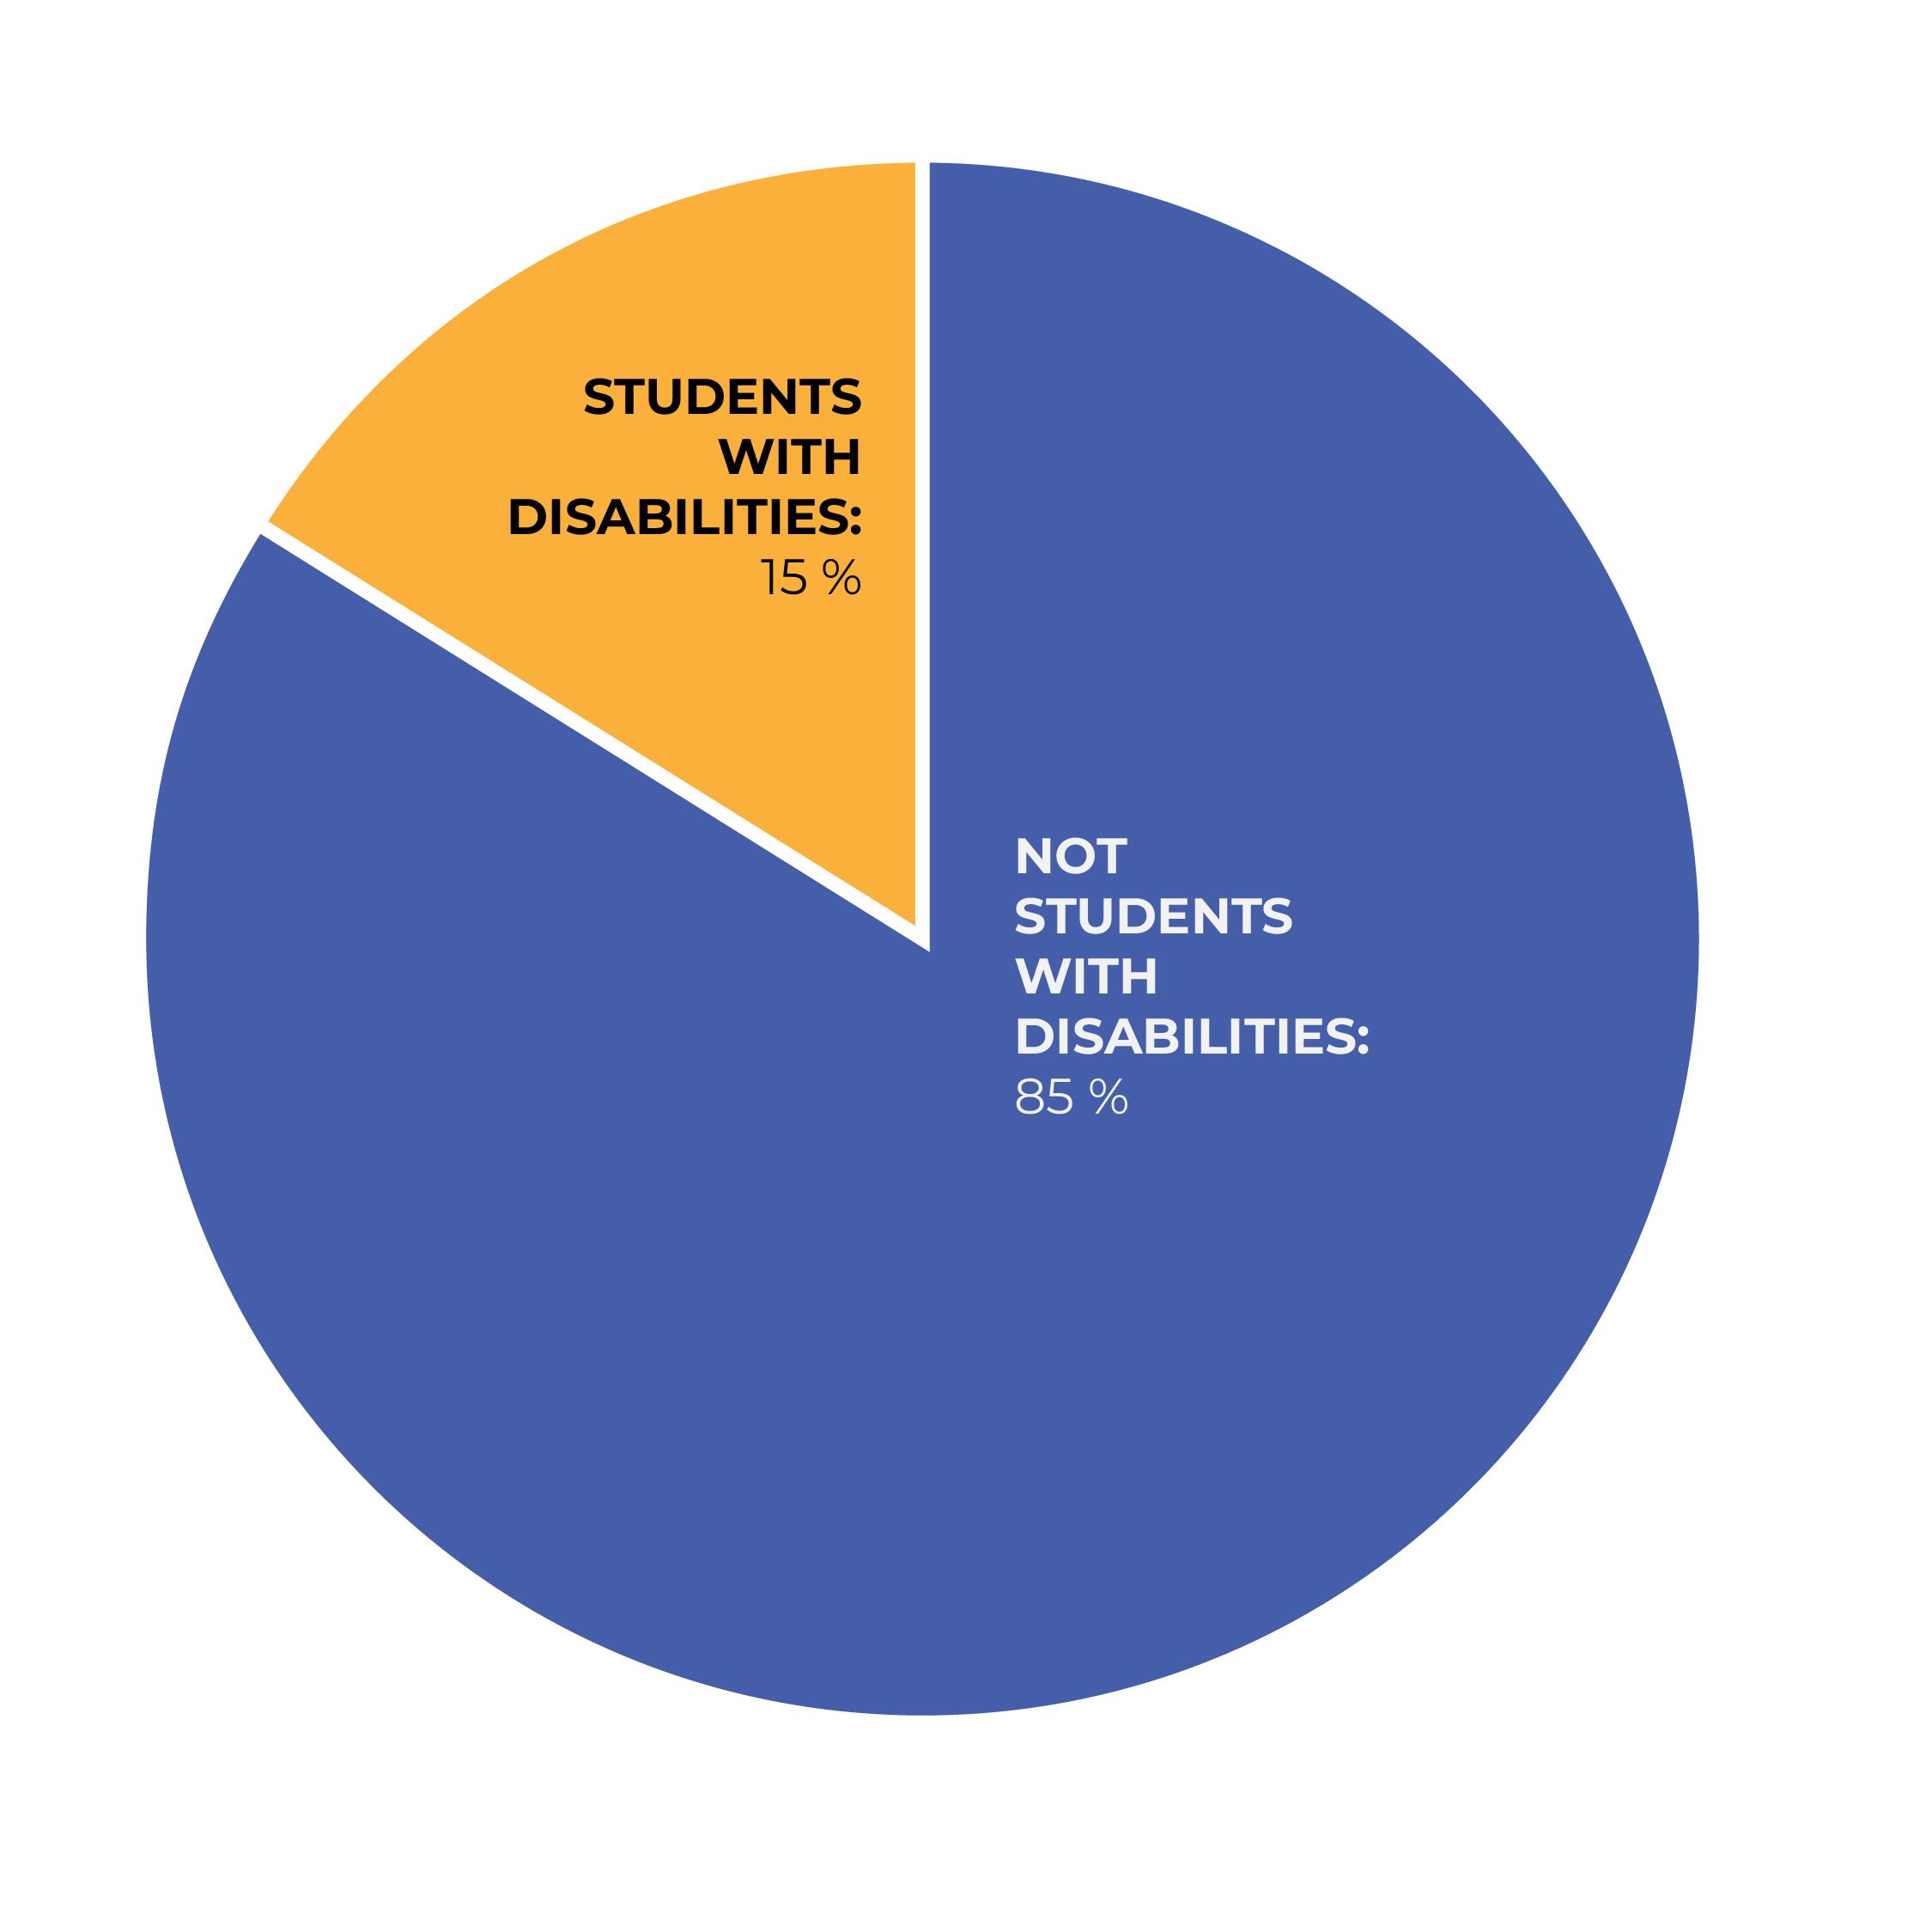 Pie chart showing breakdown of students with disabilities in the district